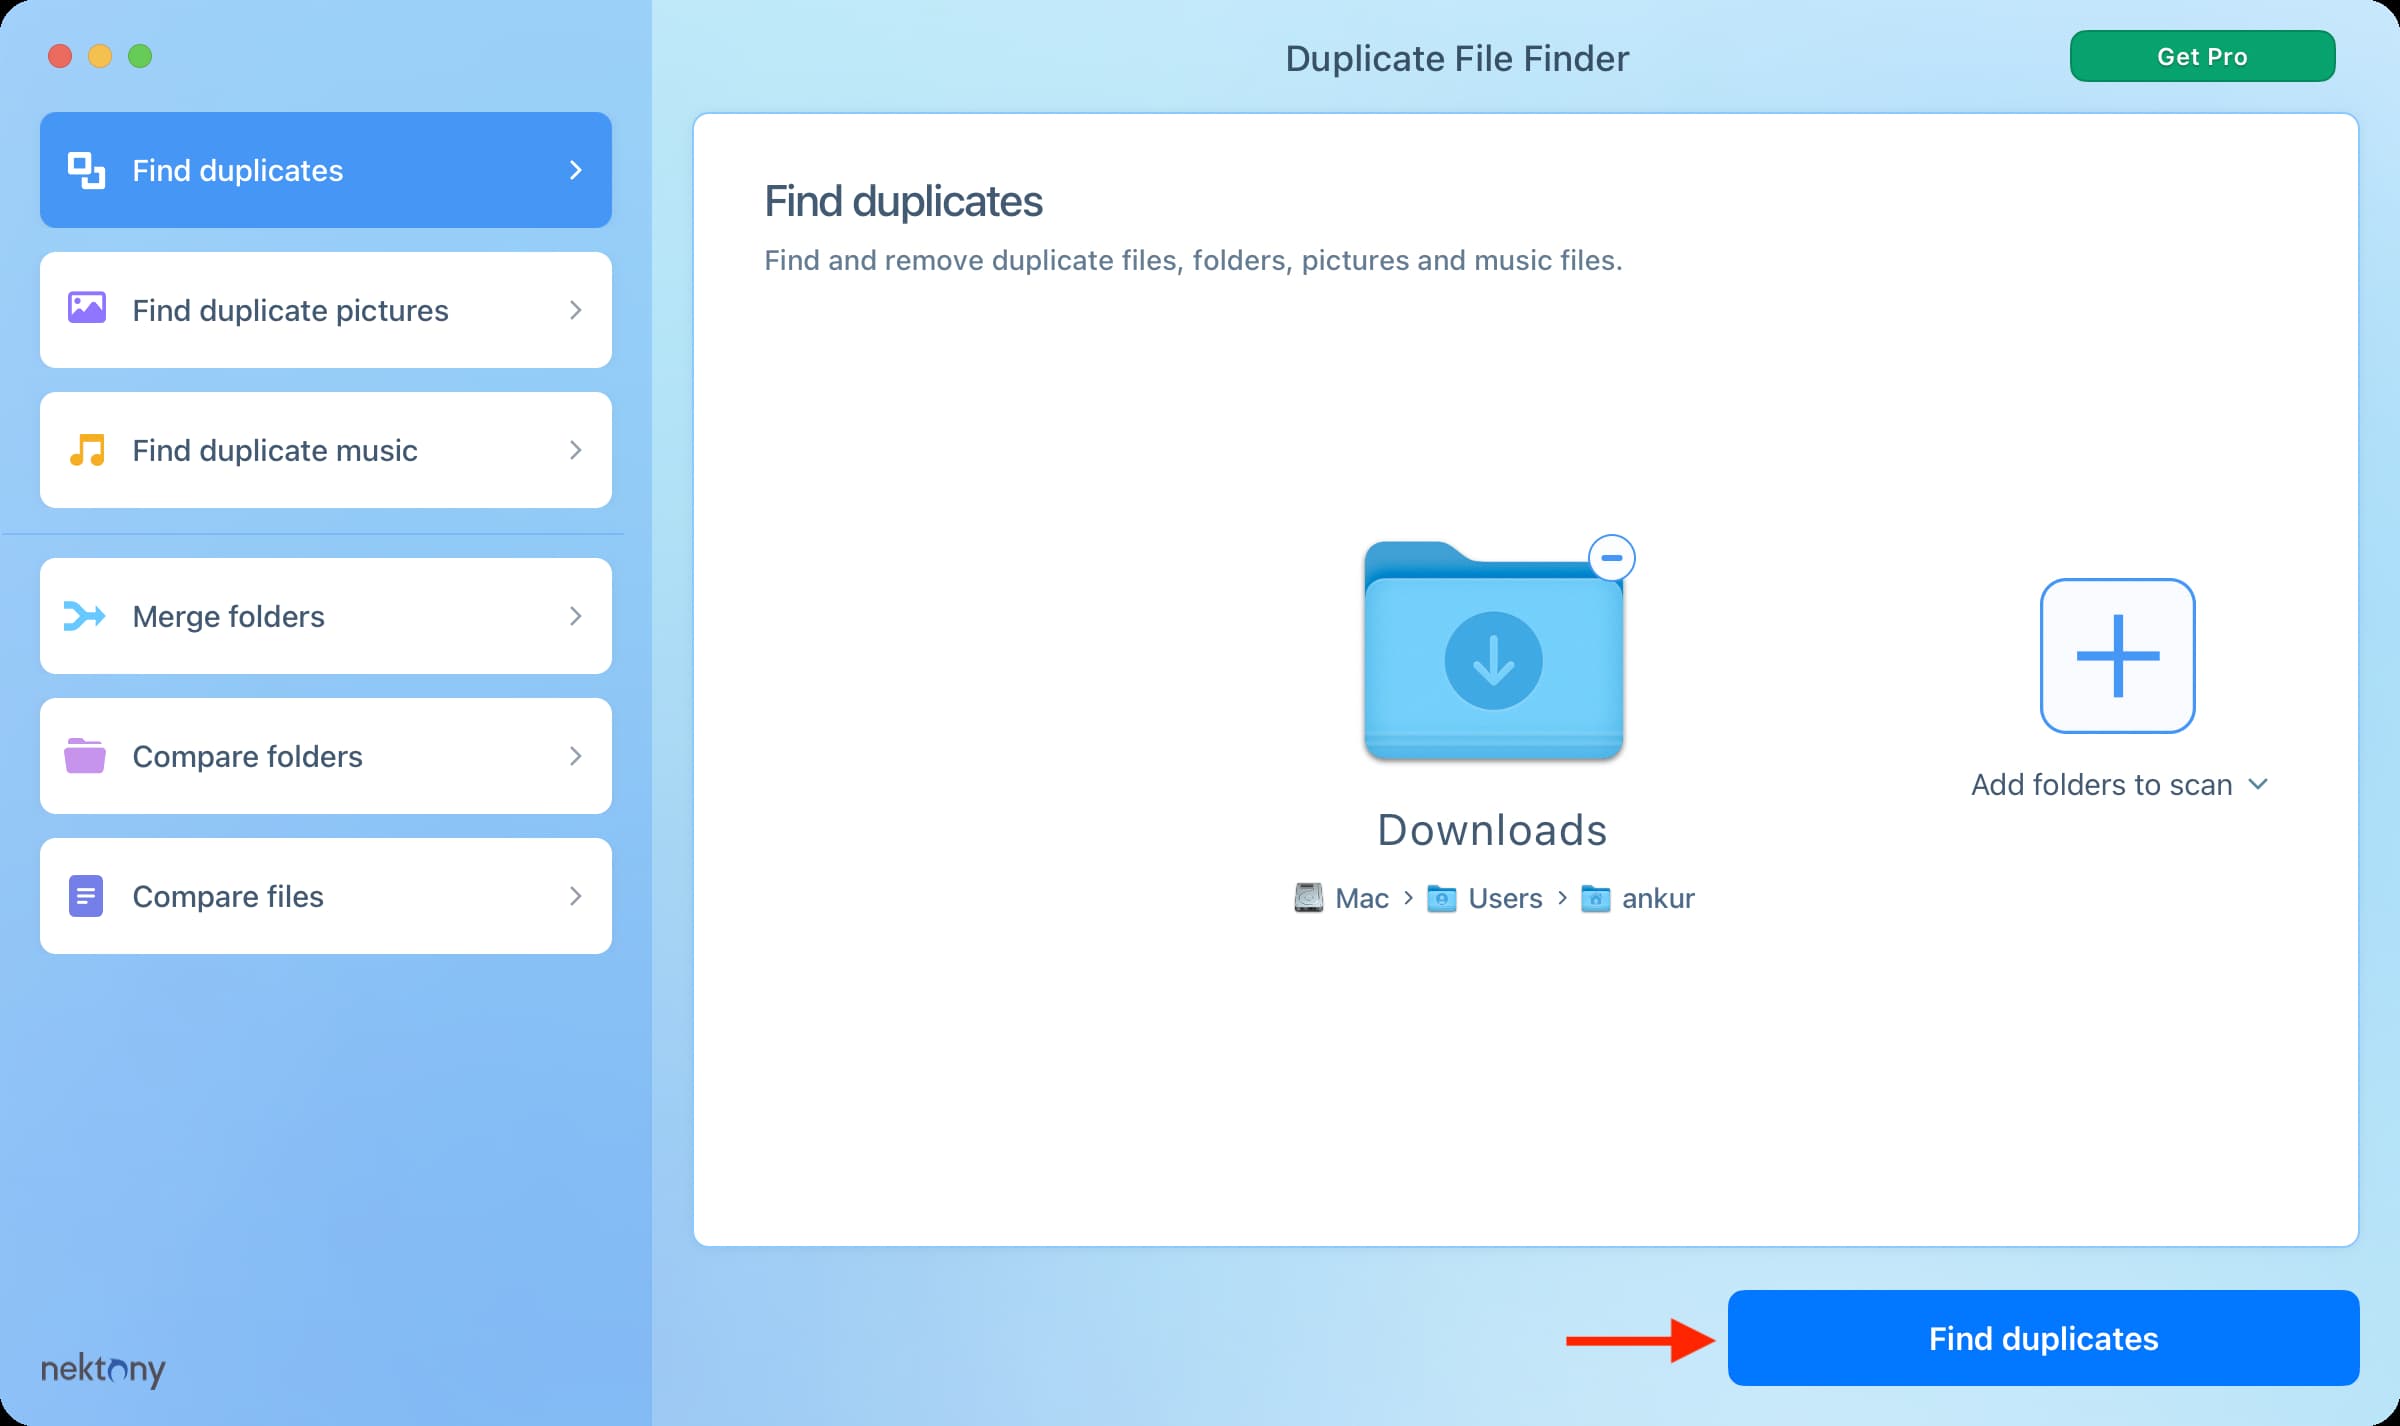 Find duplicates using Duplicate File Finder Remover on Mac